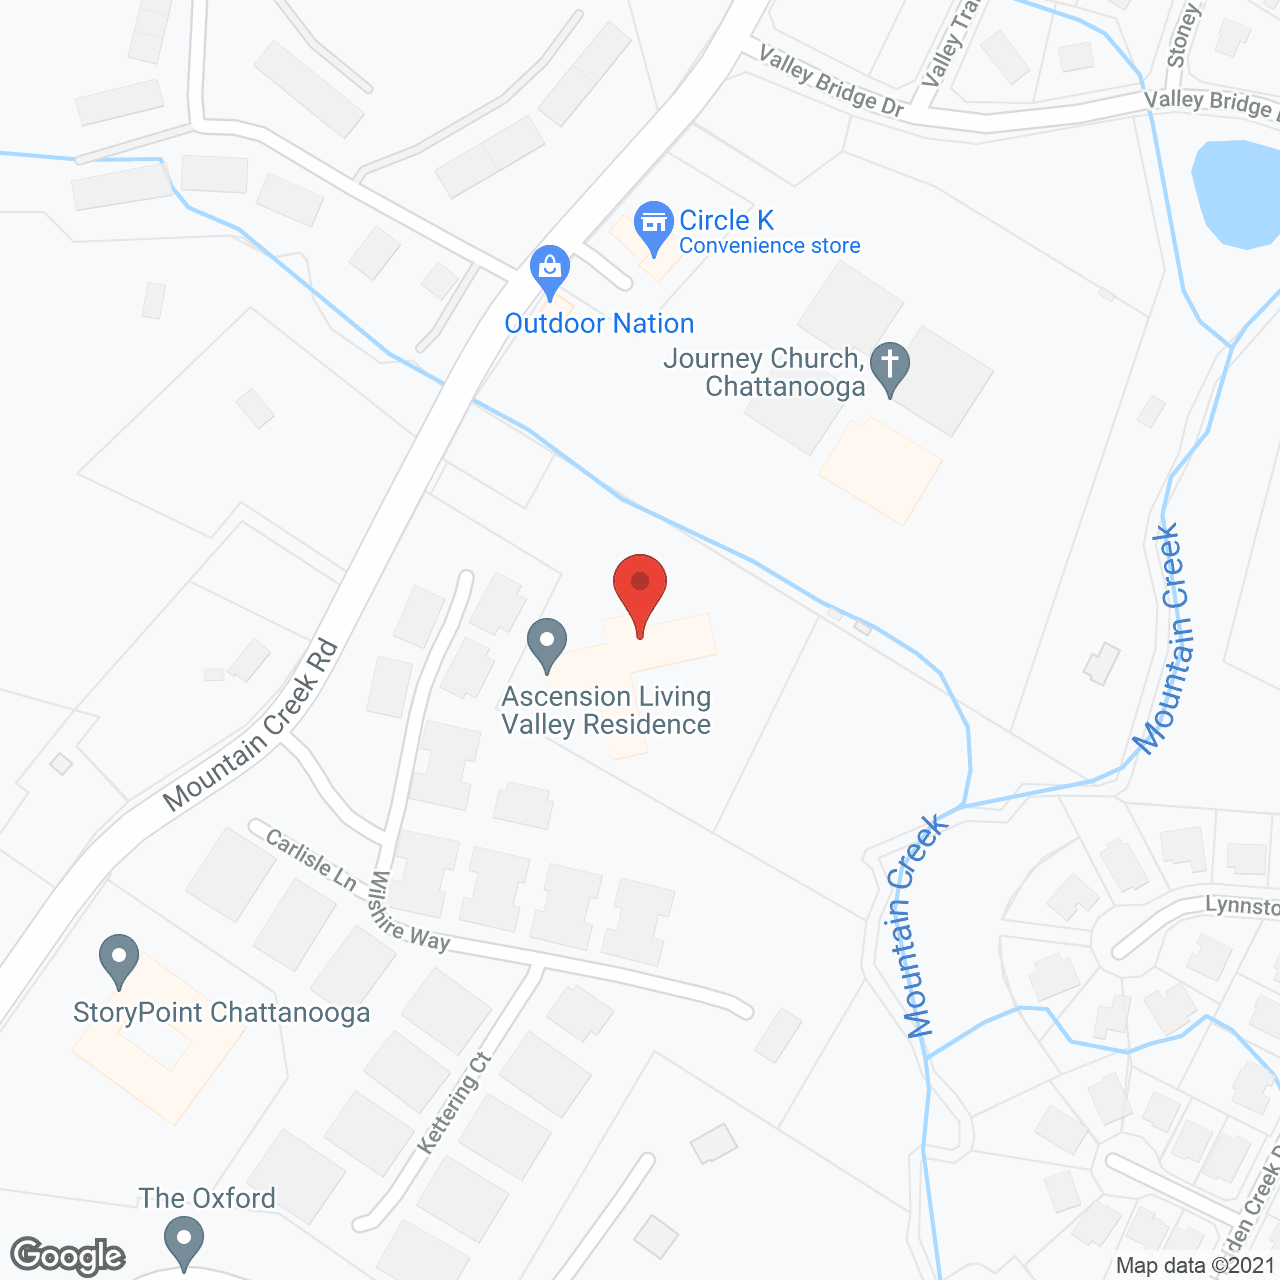 Ascension Living Valley Residence in google map